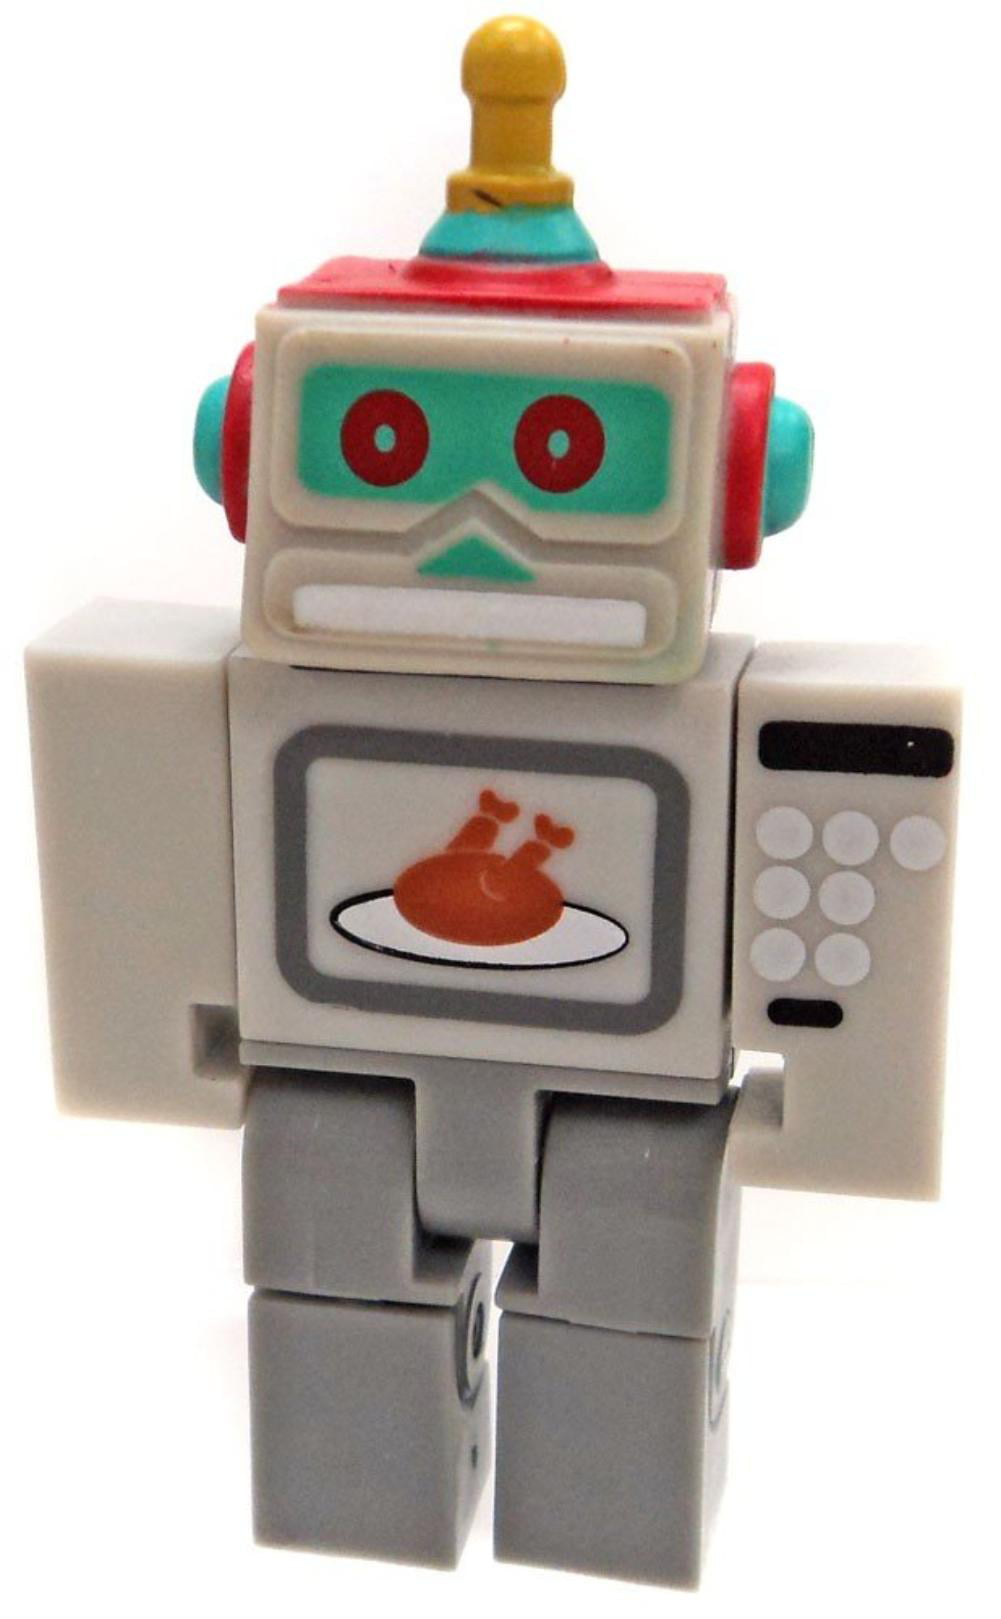 Series 2 Microwave Spybot Action Figure Mystery Box Virtual Item Code 2 5 Figure Comes As Pictured With Online Code By Roblox Walmart Com Walmart Com - roblox series 2 codes